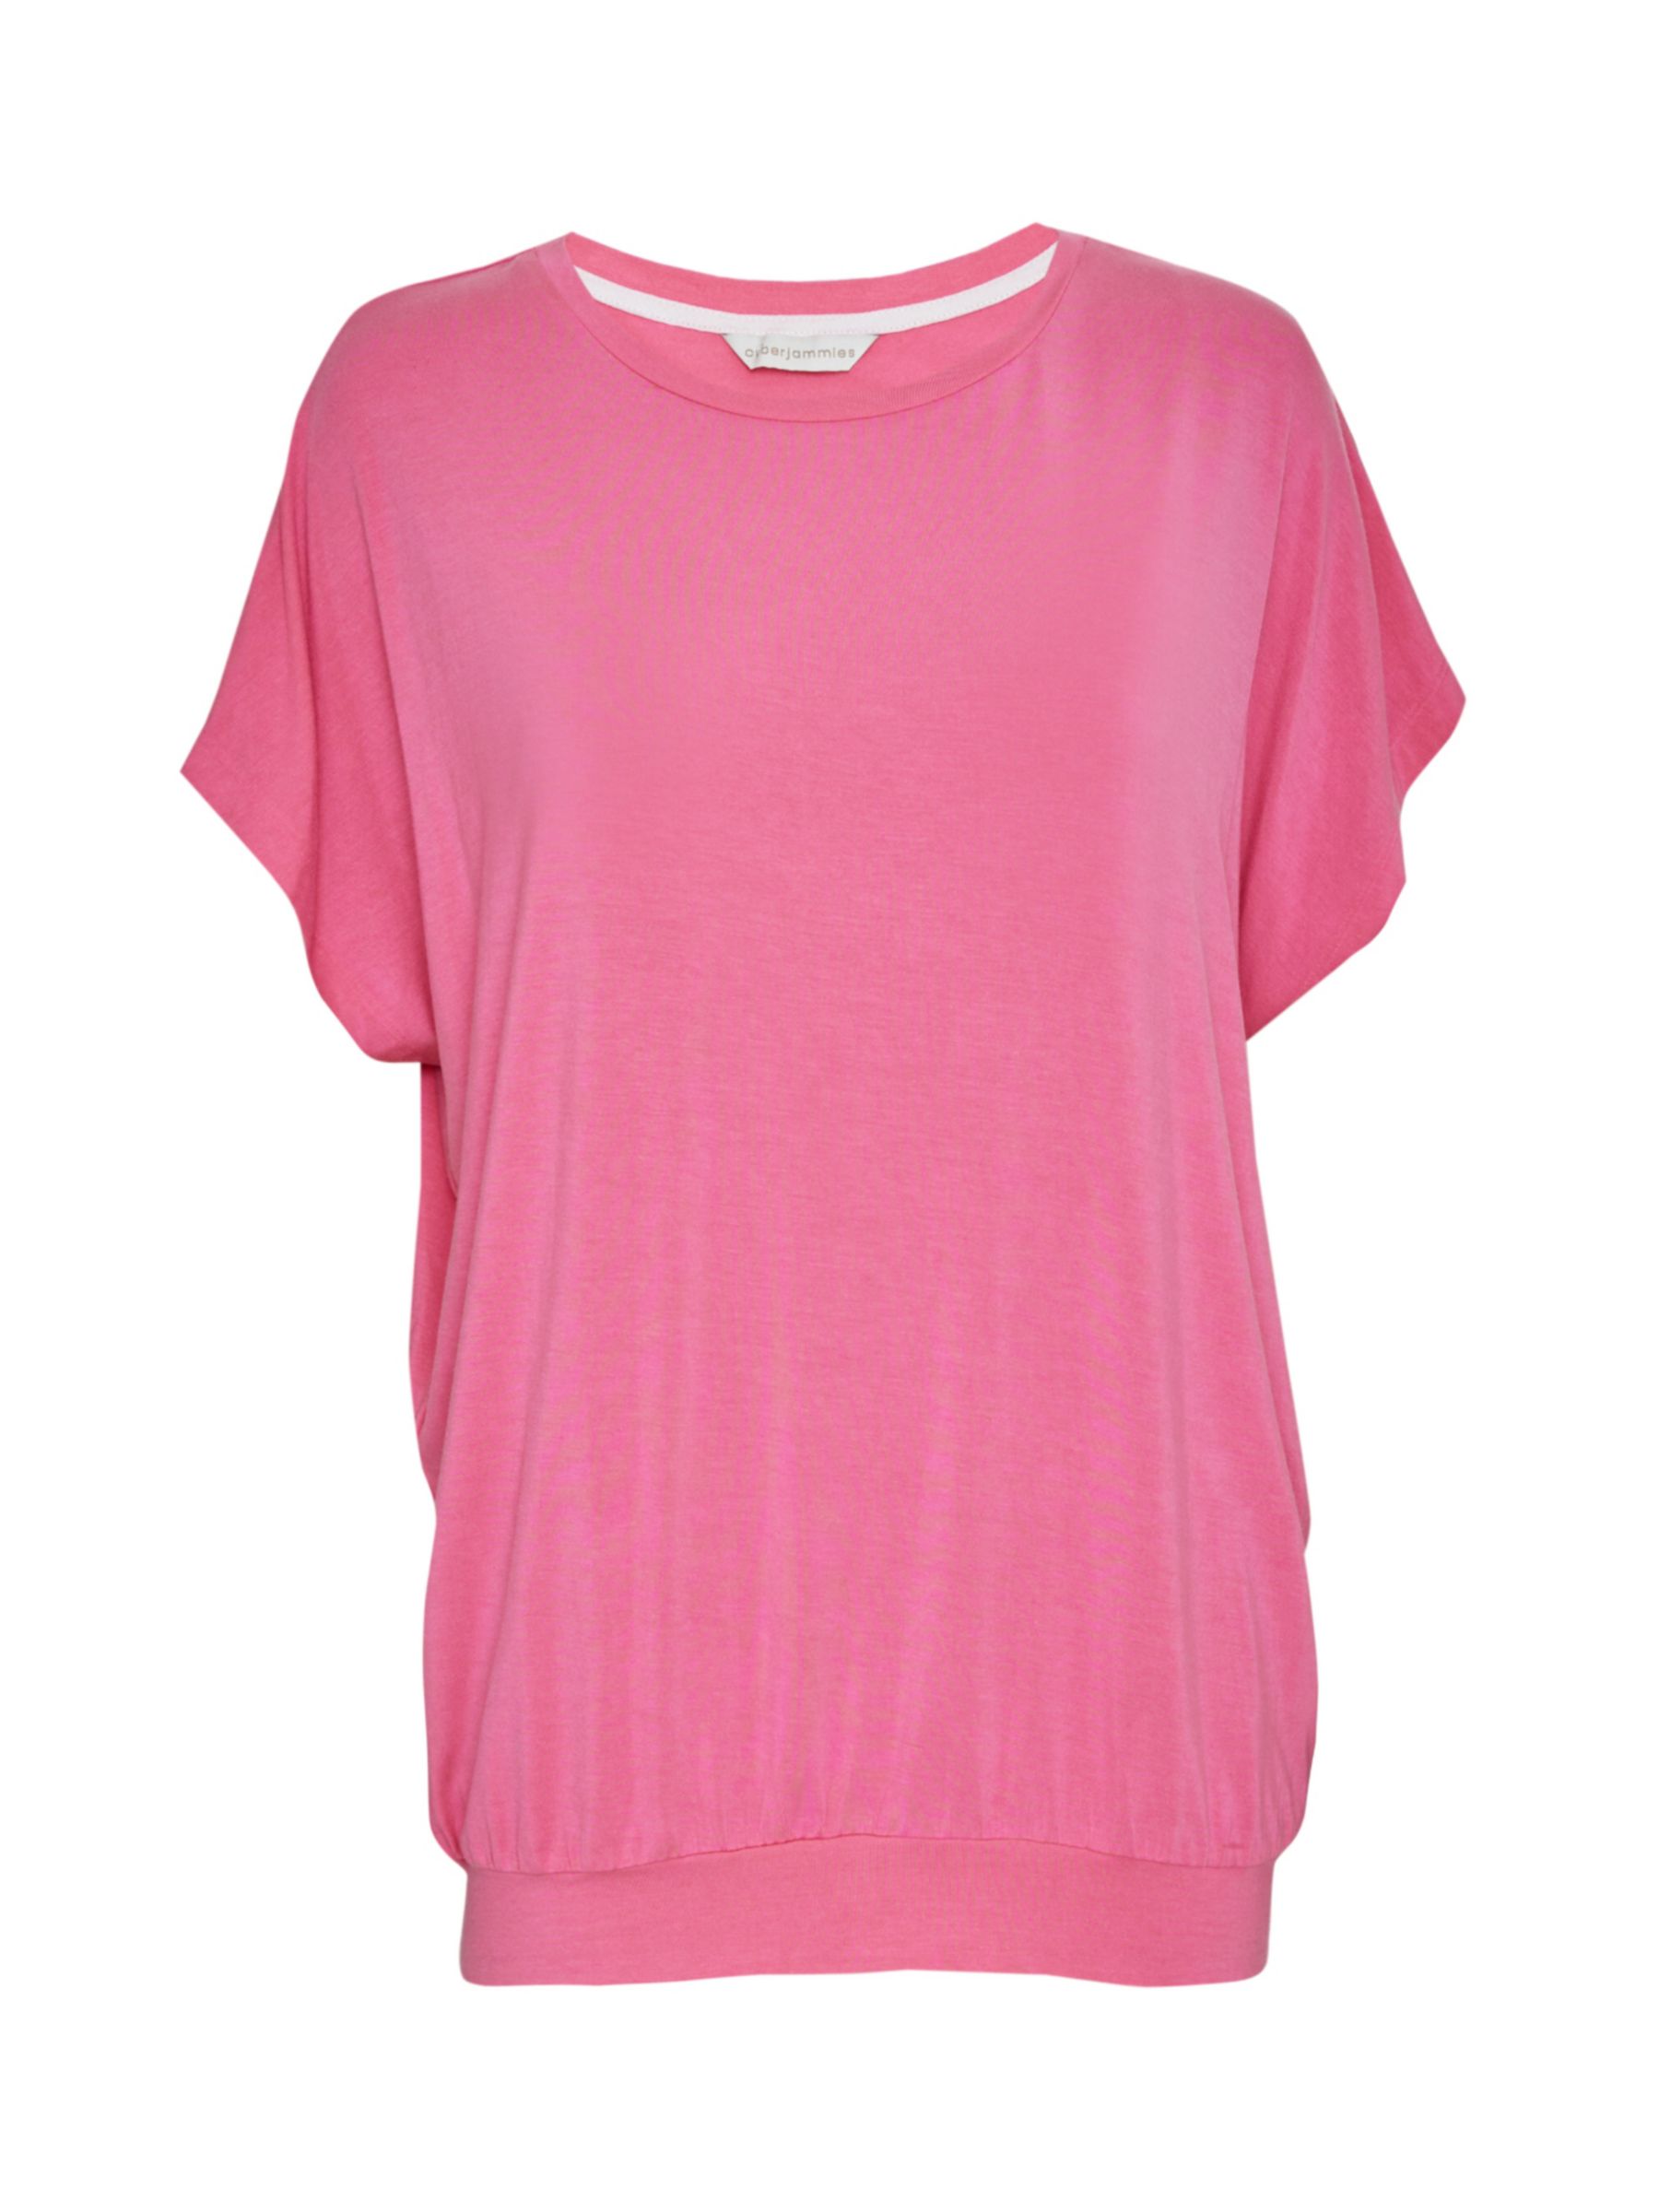 Buy Cyberjammies Shelly Jersey Slouch Pyjama Top, Pink Online at johnlewis.com